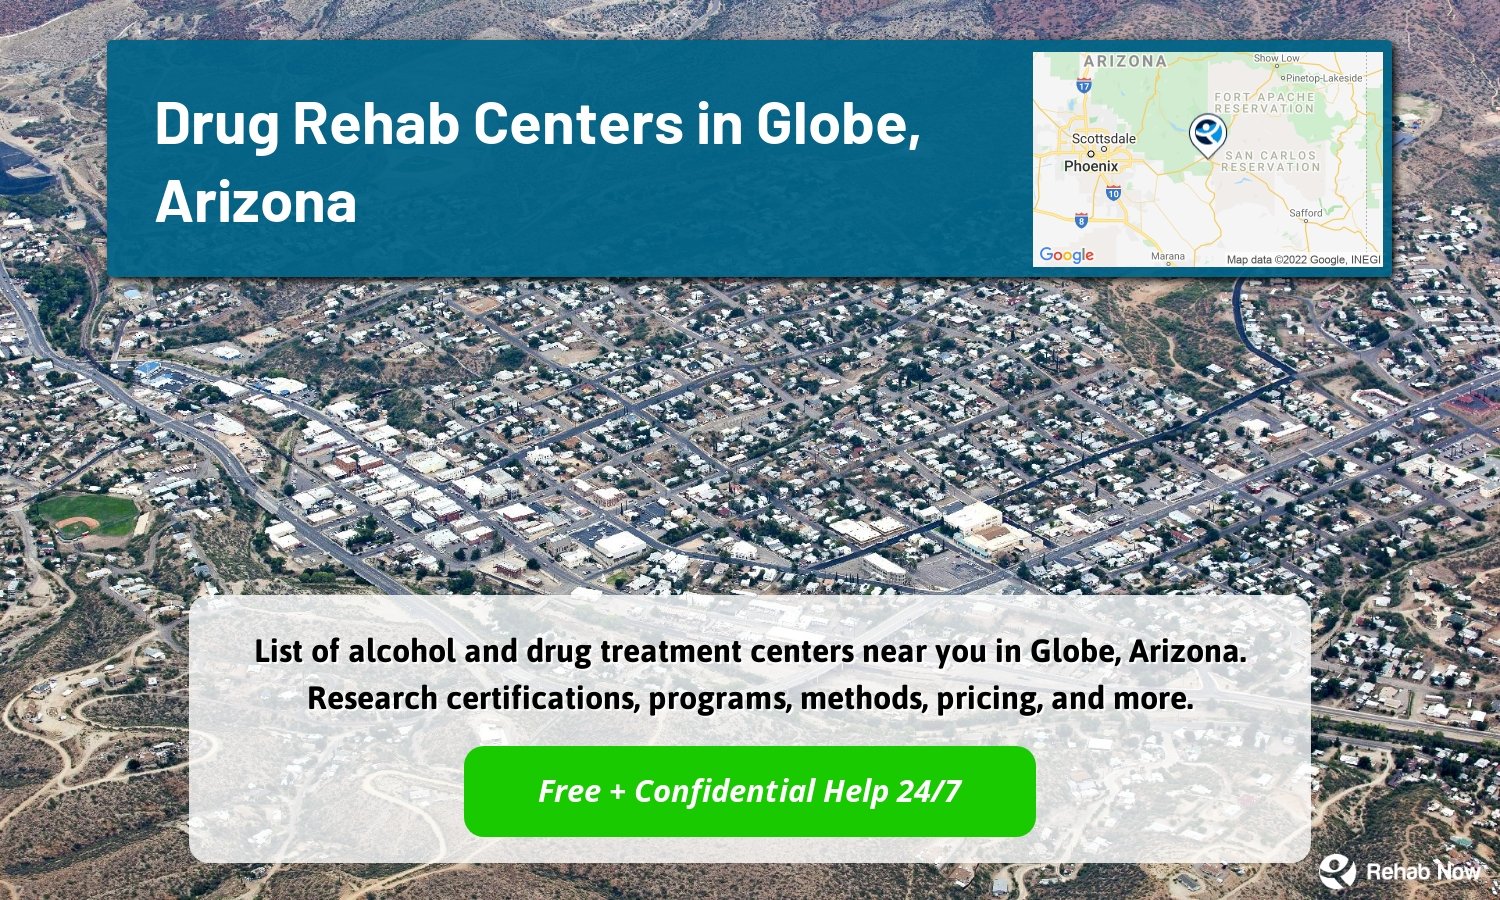 List of alcohol and drug treatment centers near you in Globe, Arizona. Research certifications, programs, methods, pricing, and more.